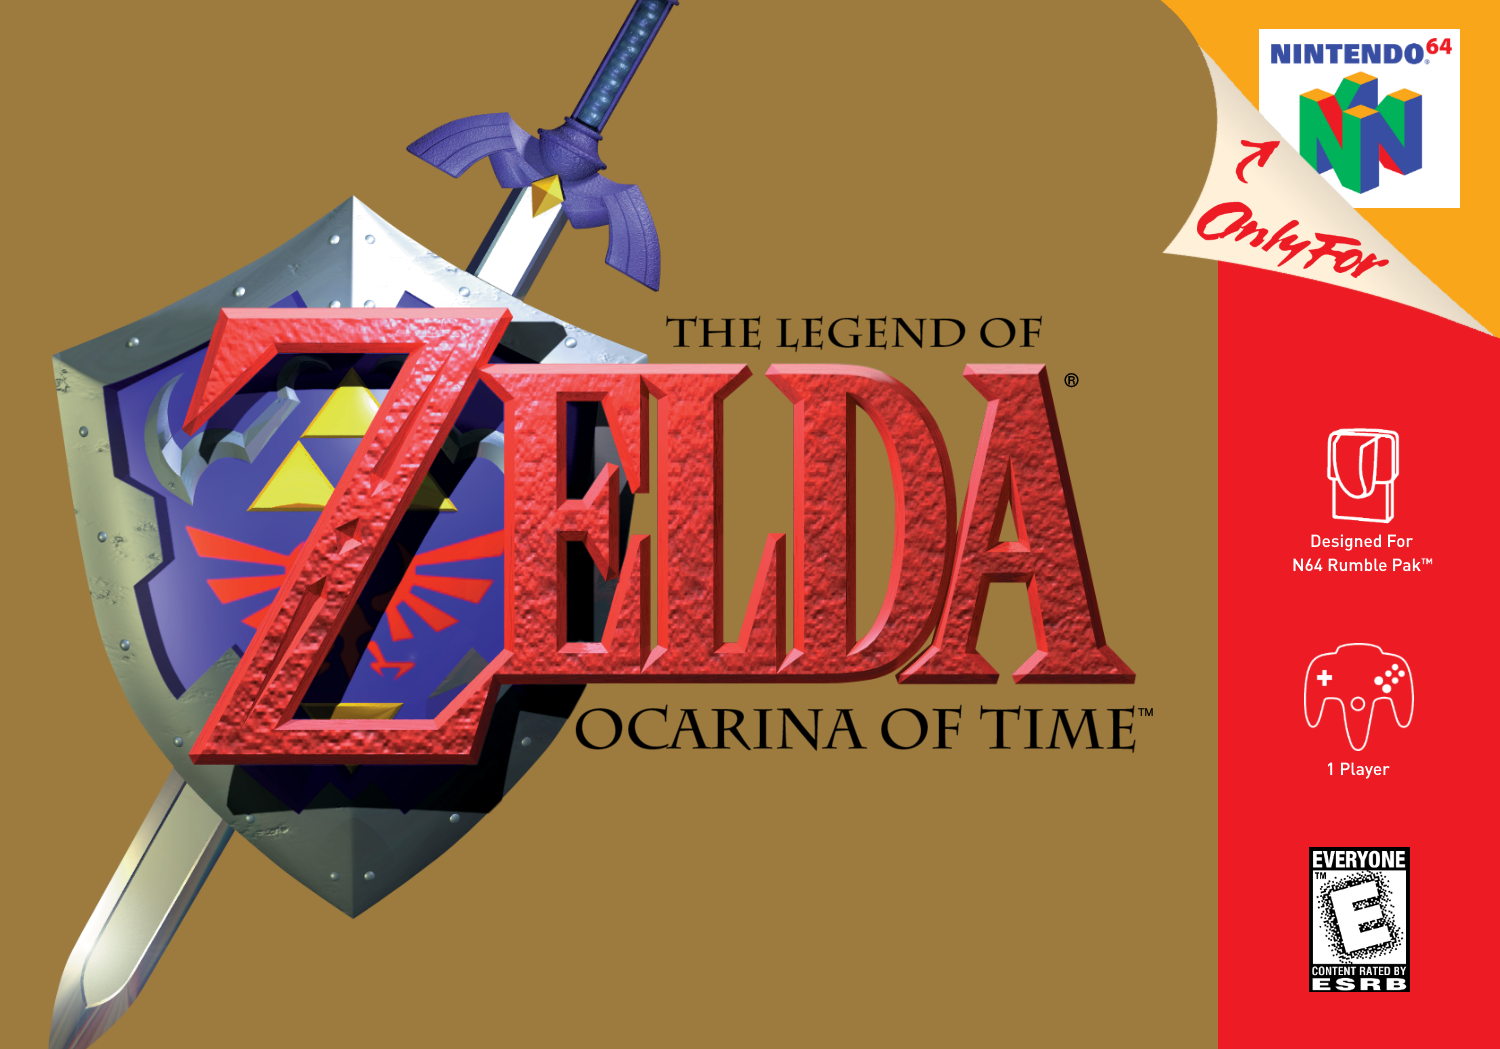 The original Ocarina of Time is held back by the N64 hardware